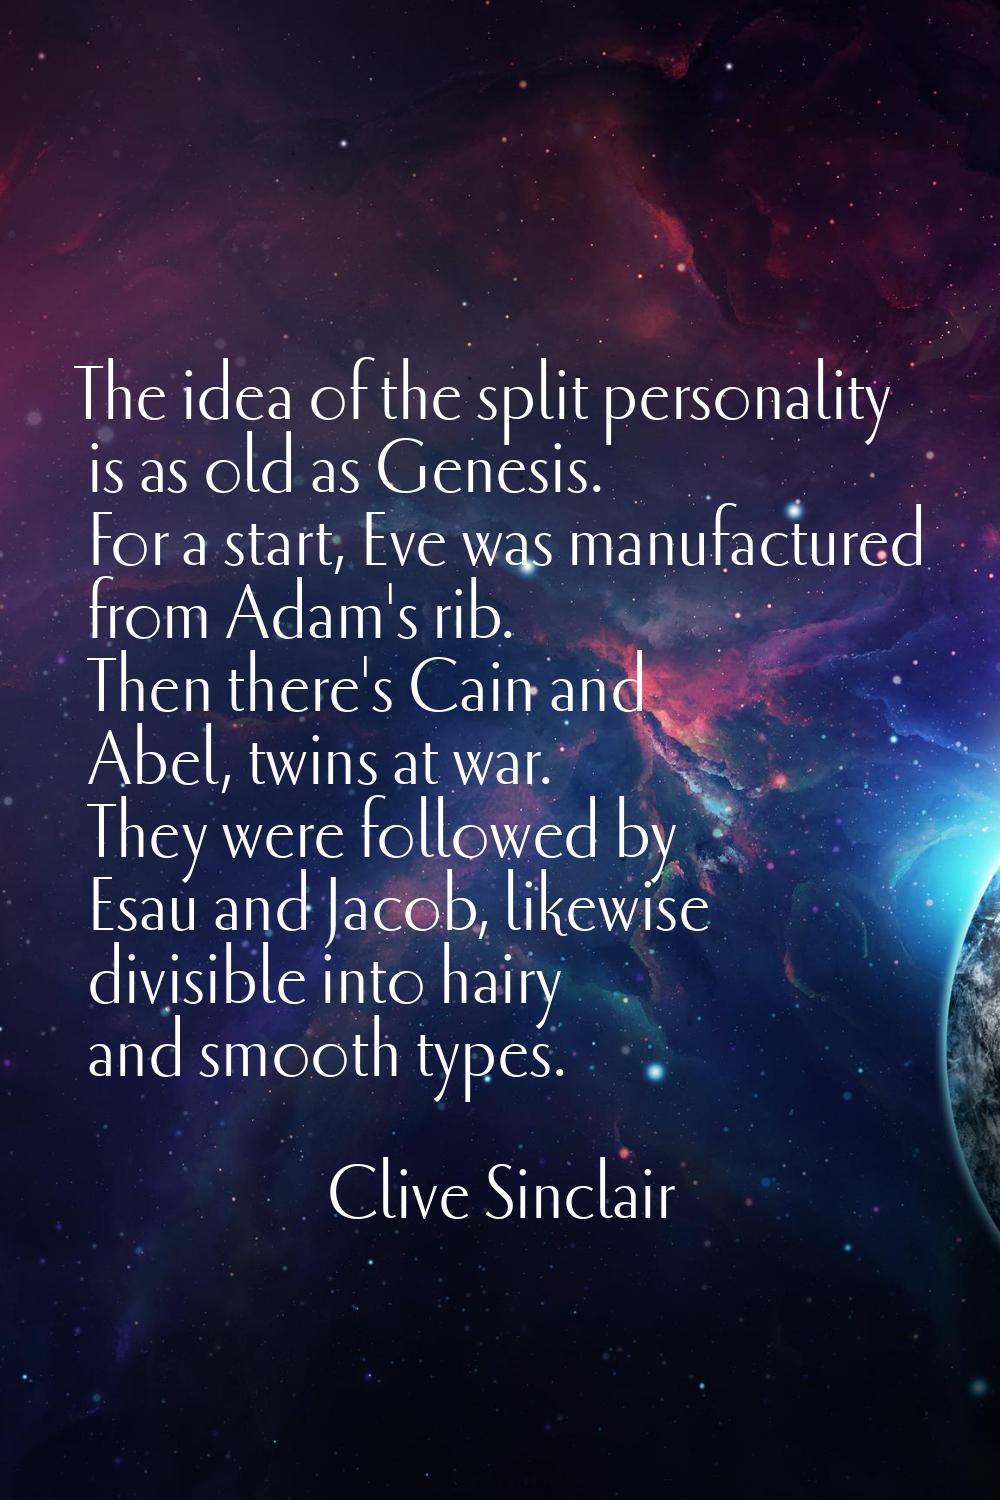 The idea of the split personality is as old as Genesis. For a start, Eve was manufactured from Adam